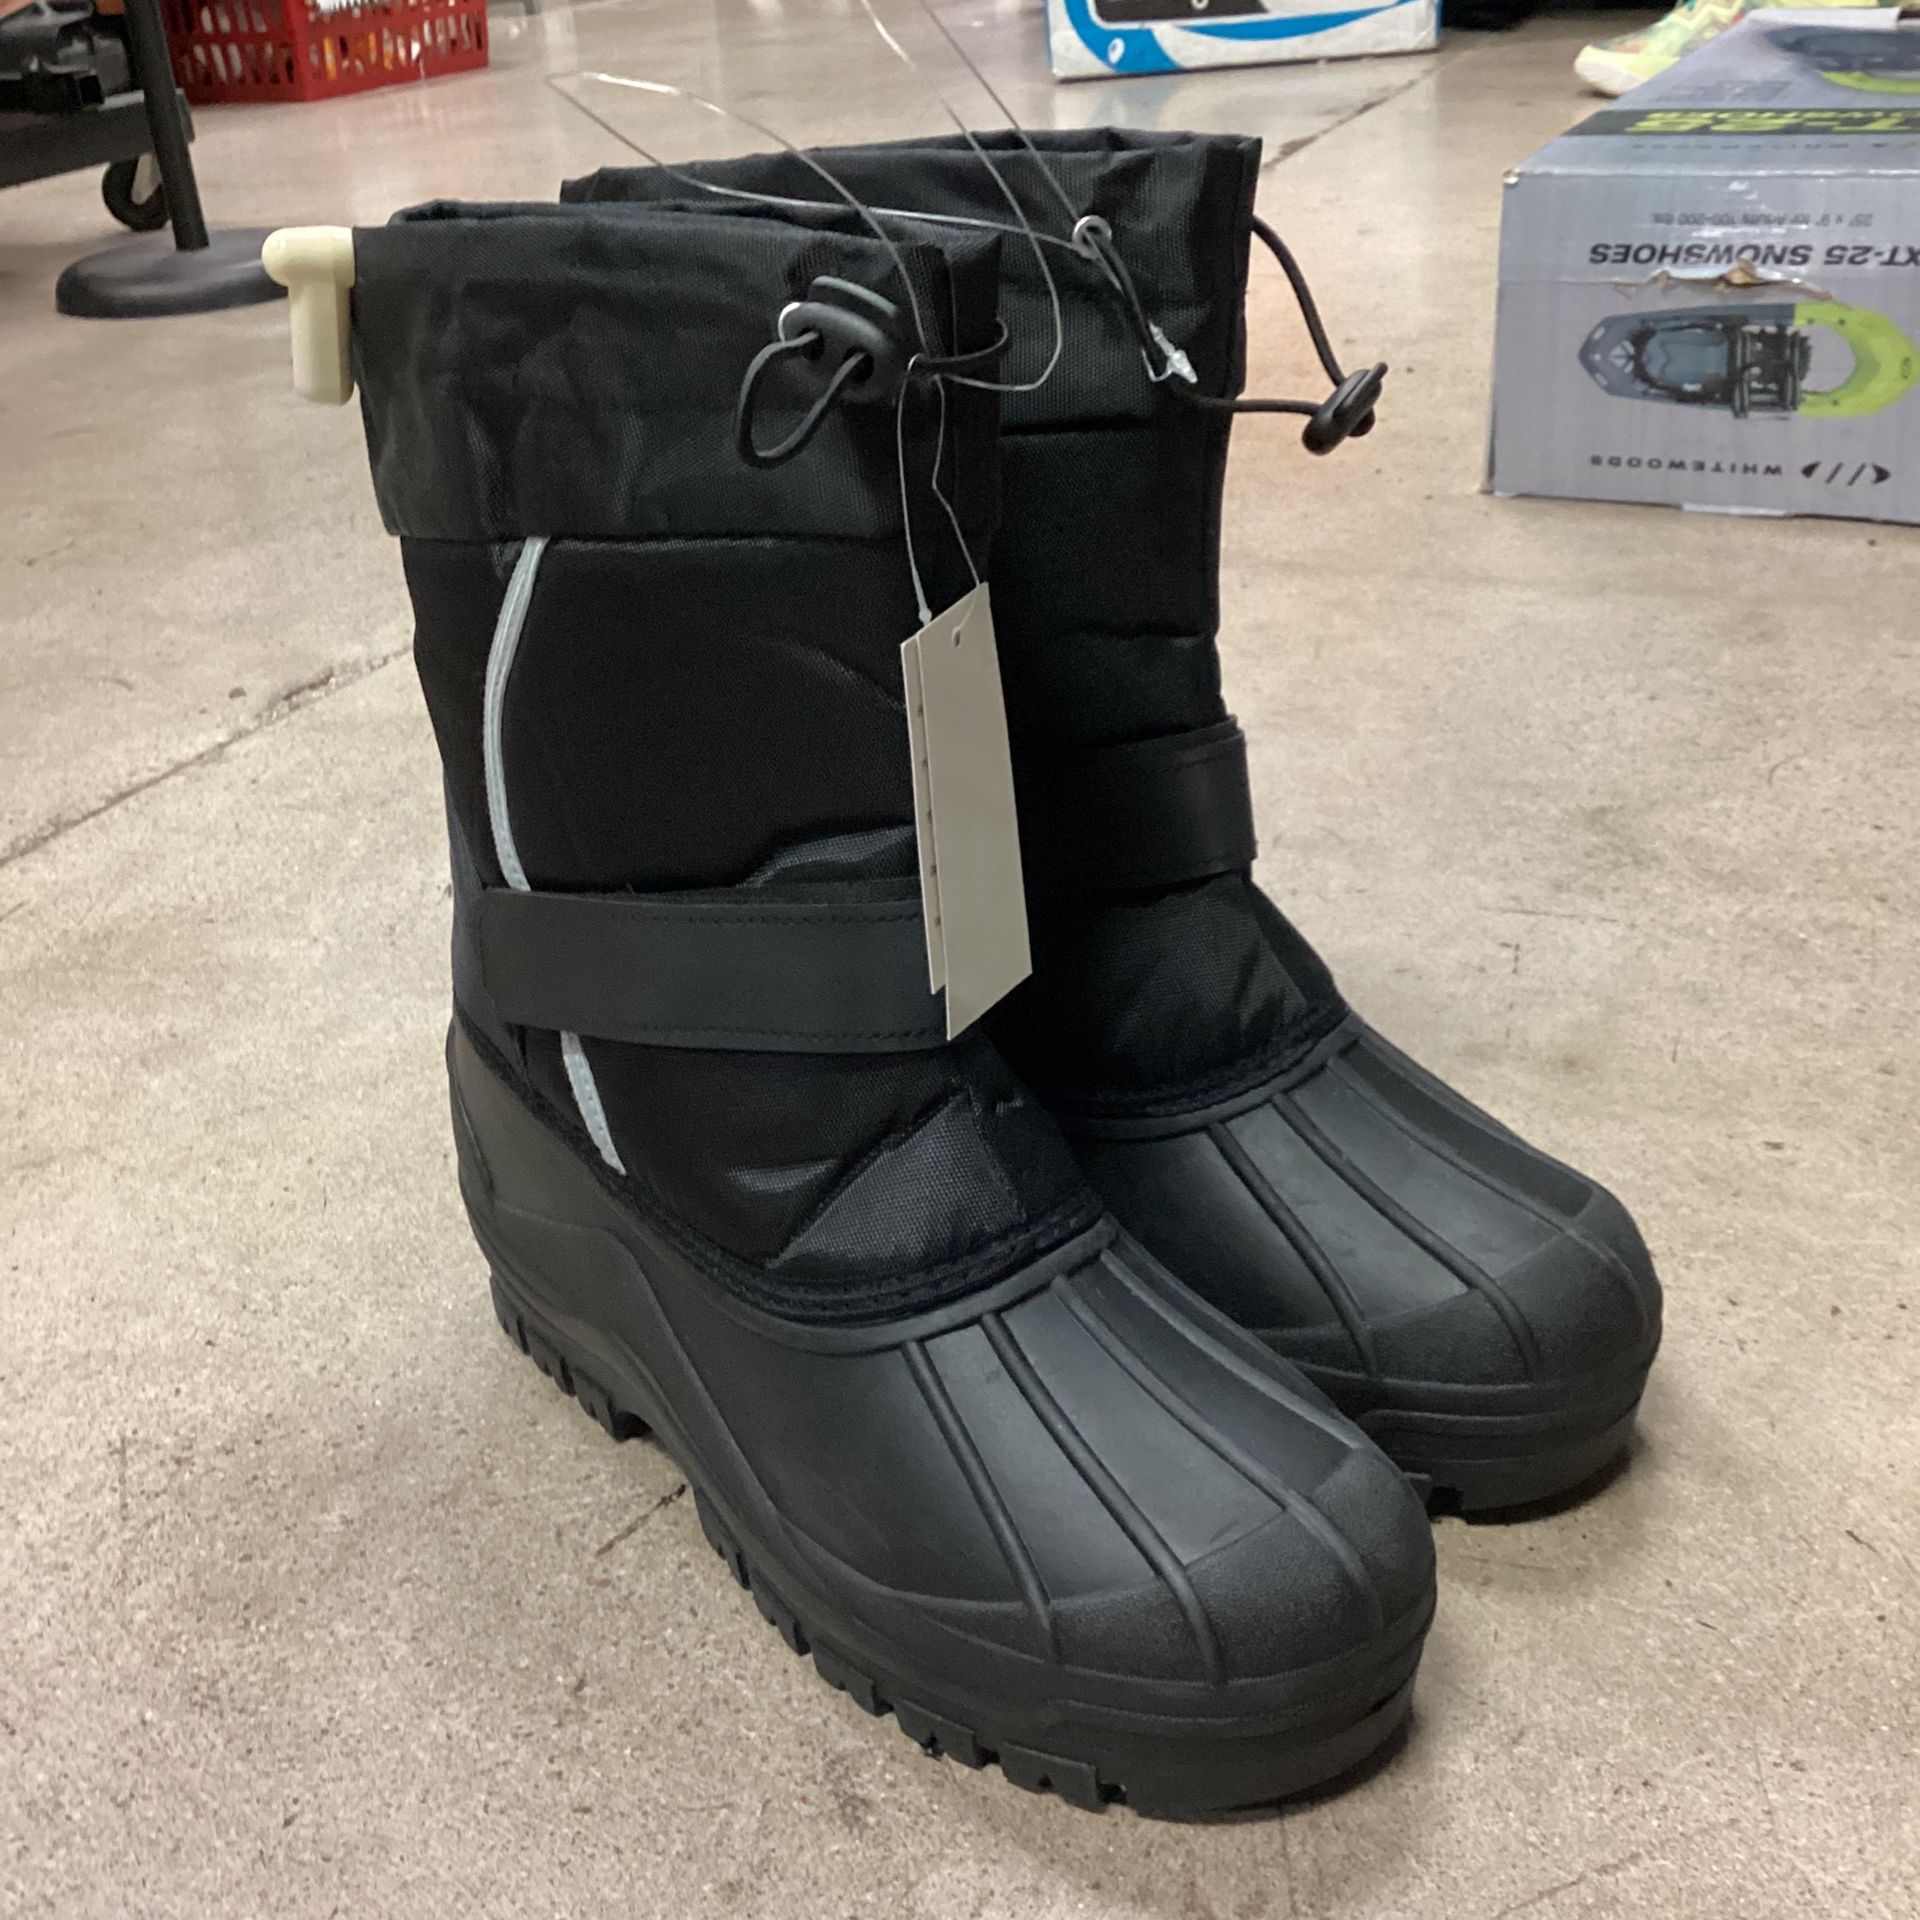 New WFS Snow Stopper Snow Boots Mens Size 9 SKU 5567-284 for Sale in ...